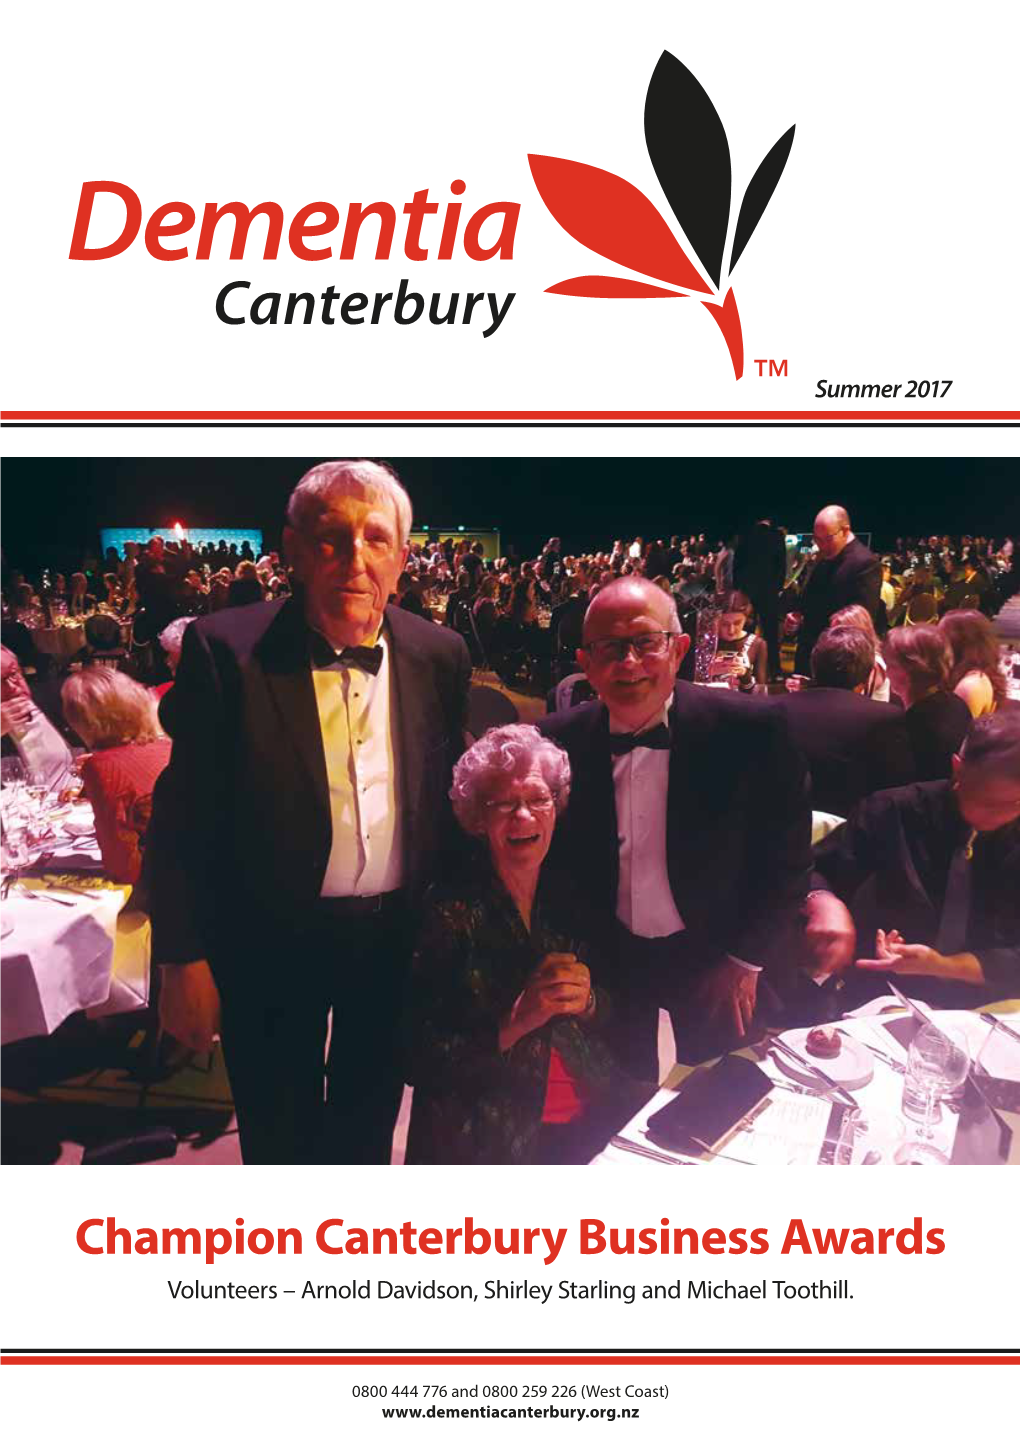 Champion Canterbury Business Awards Volunteers – Arnold Davidson, Shirley Starling and Michael Toothill